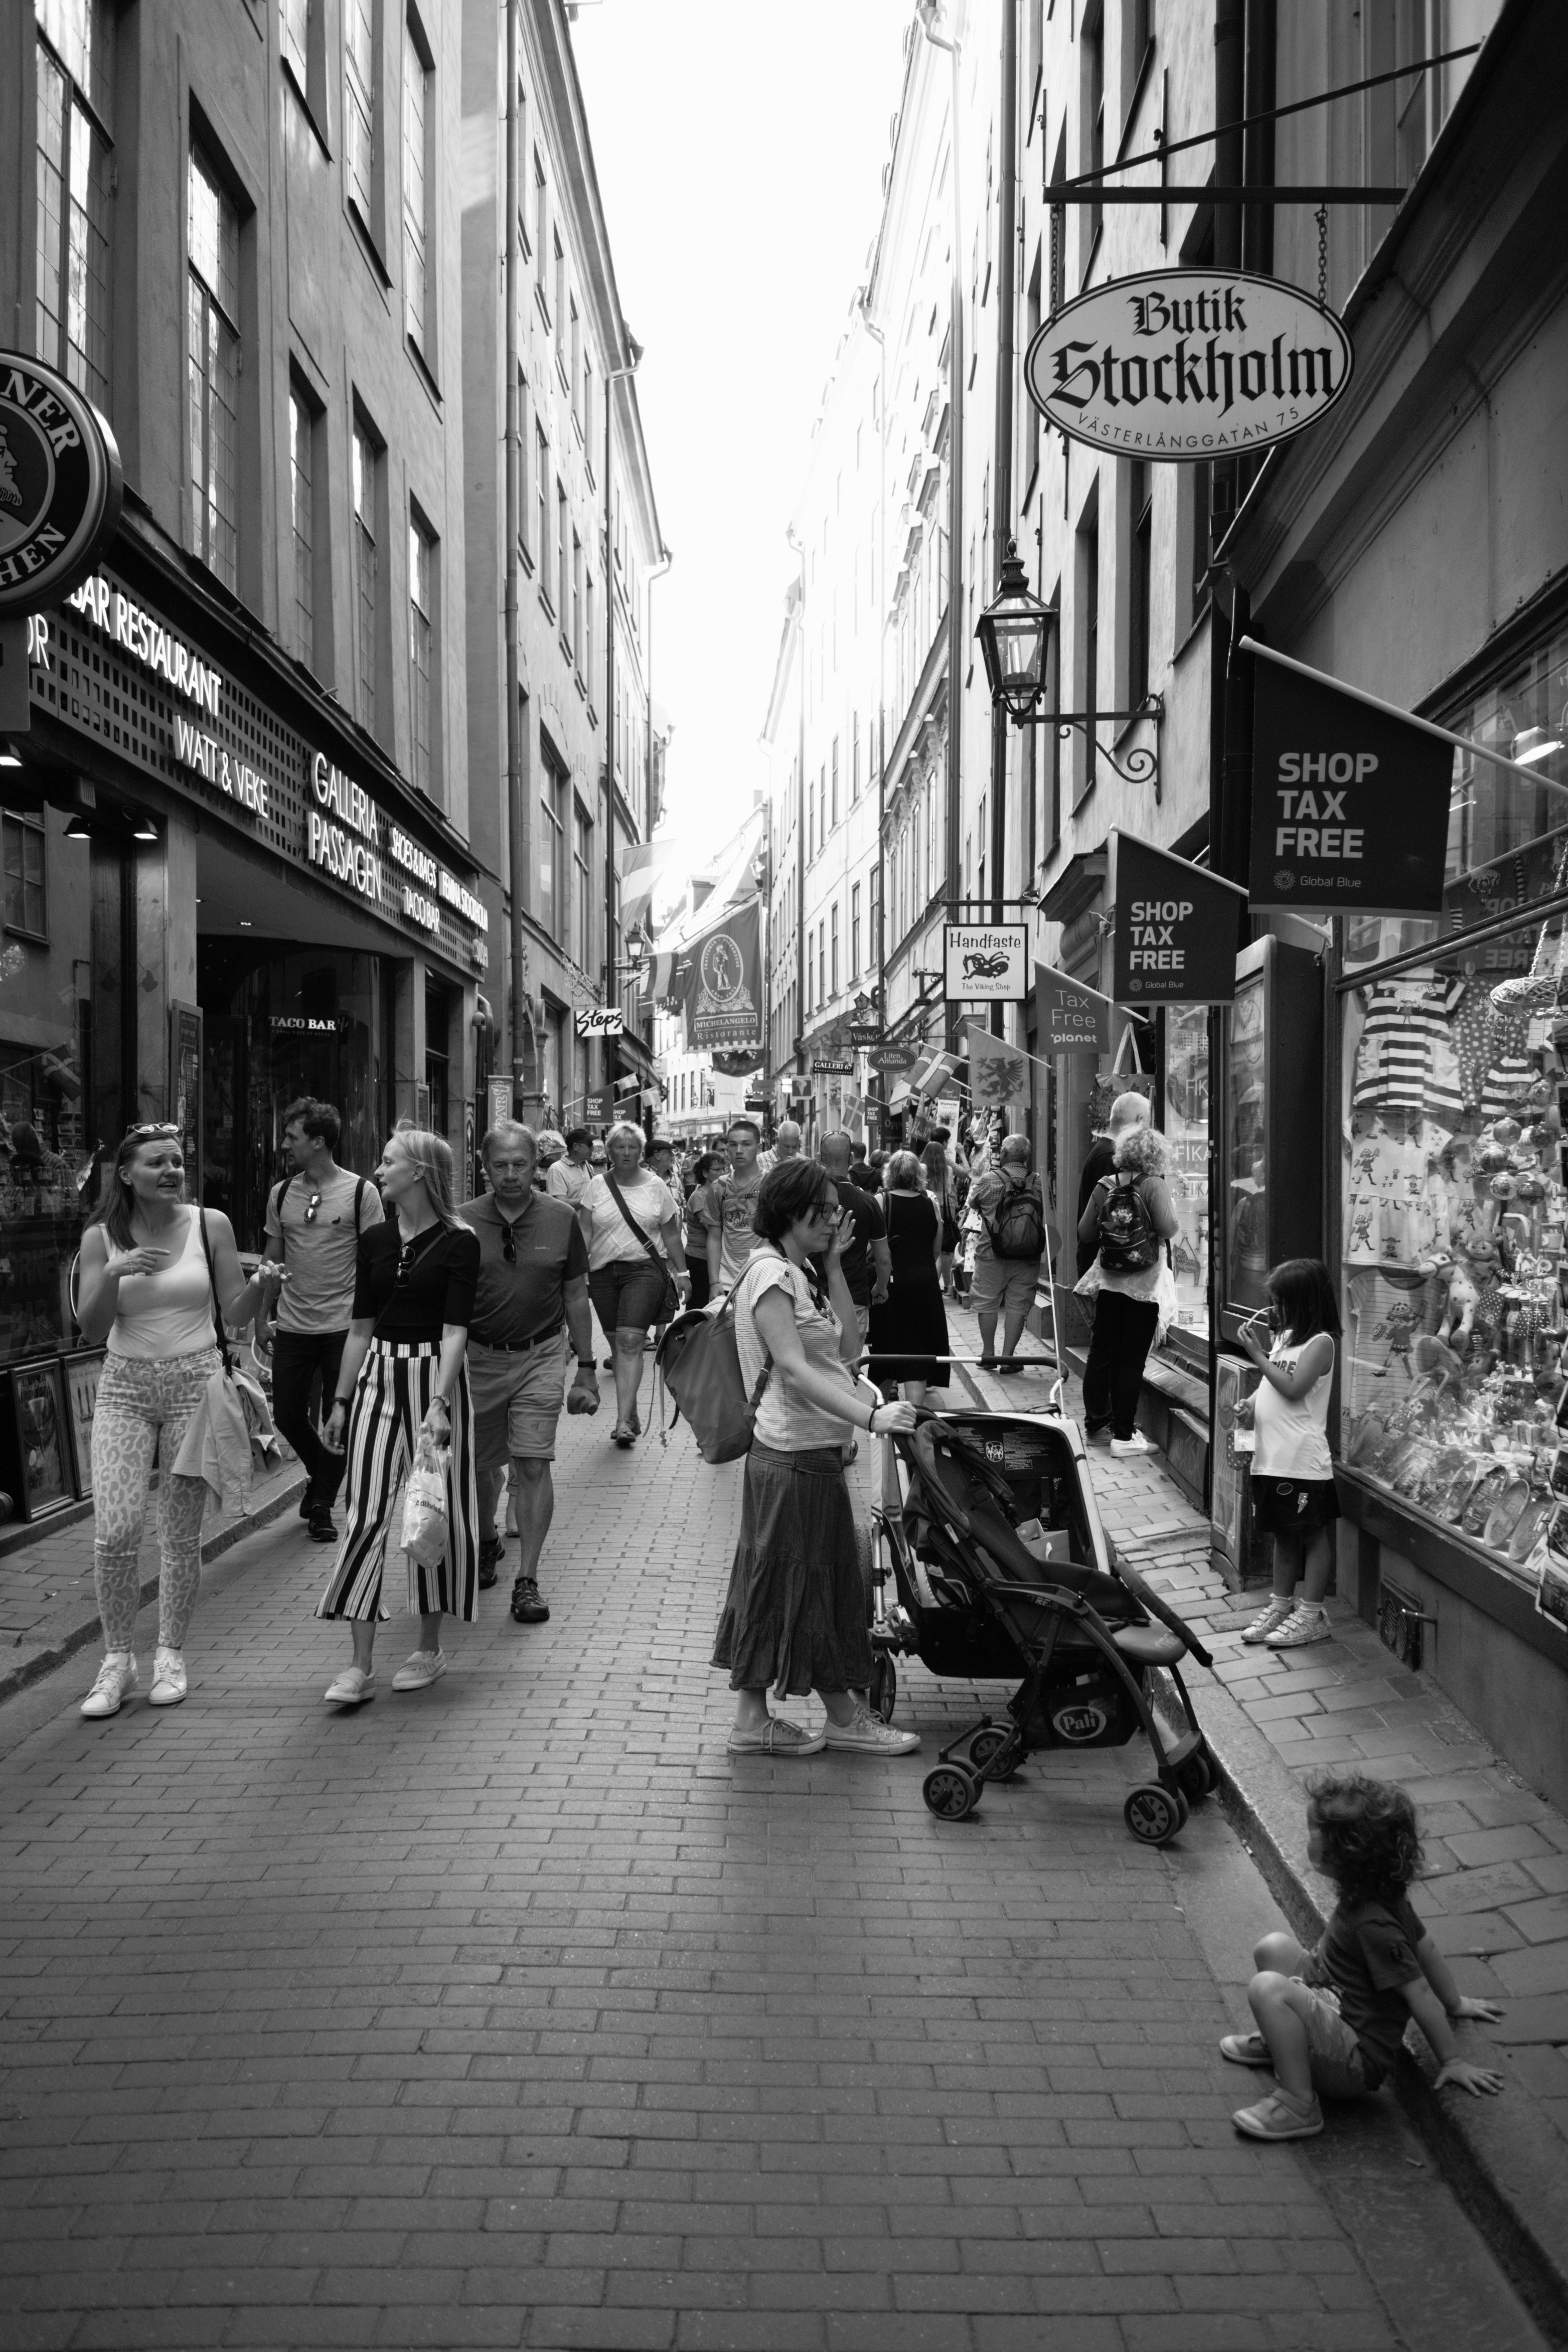 Streetlife at Old Town (, ) with Leica M Monochrom (Leica Summaron-M 28mm f/5.6) by Magnus Andersson (photography.anderssoneklund.se) at 2019-06-16 17:45:23